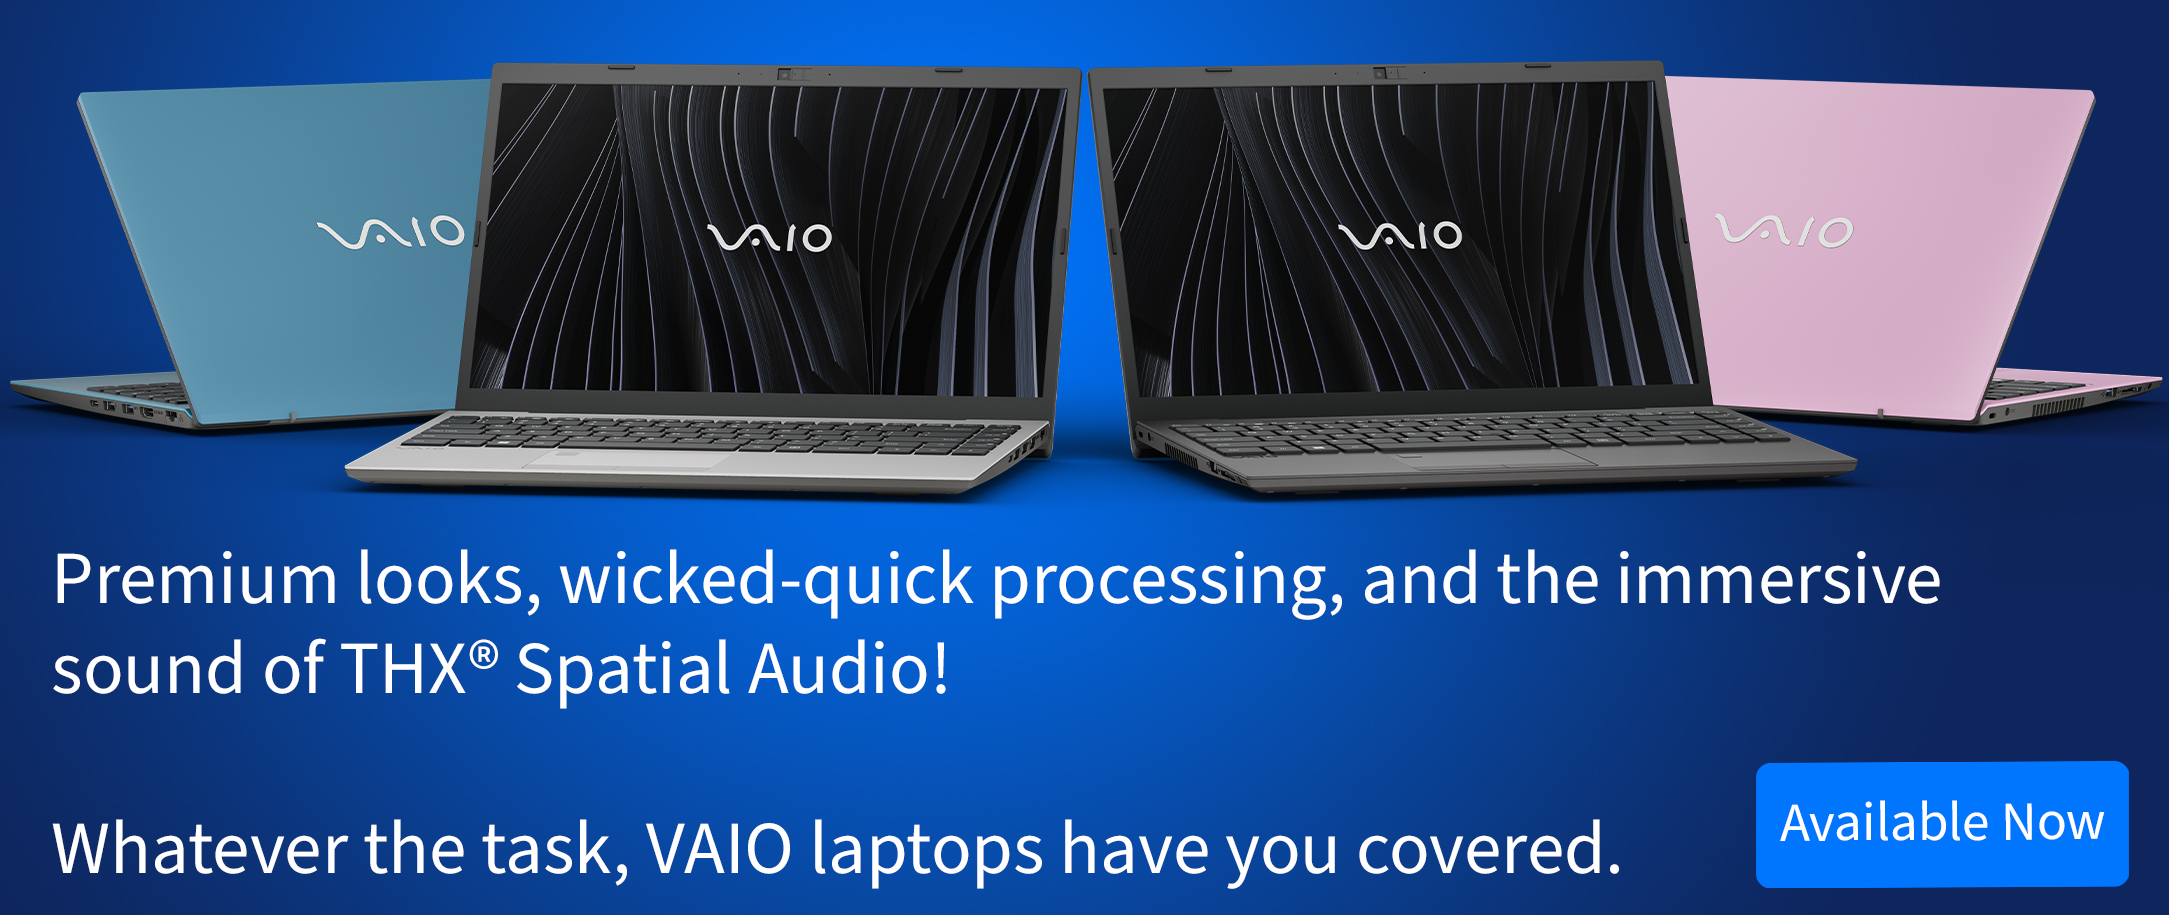 Four VAIO laptops on a blue field